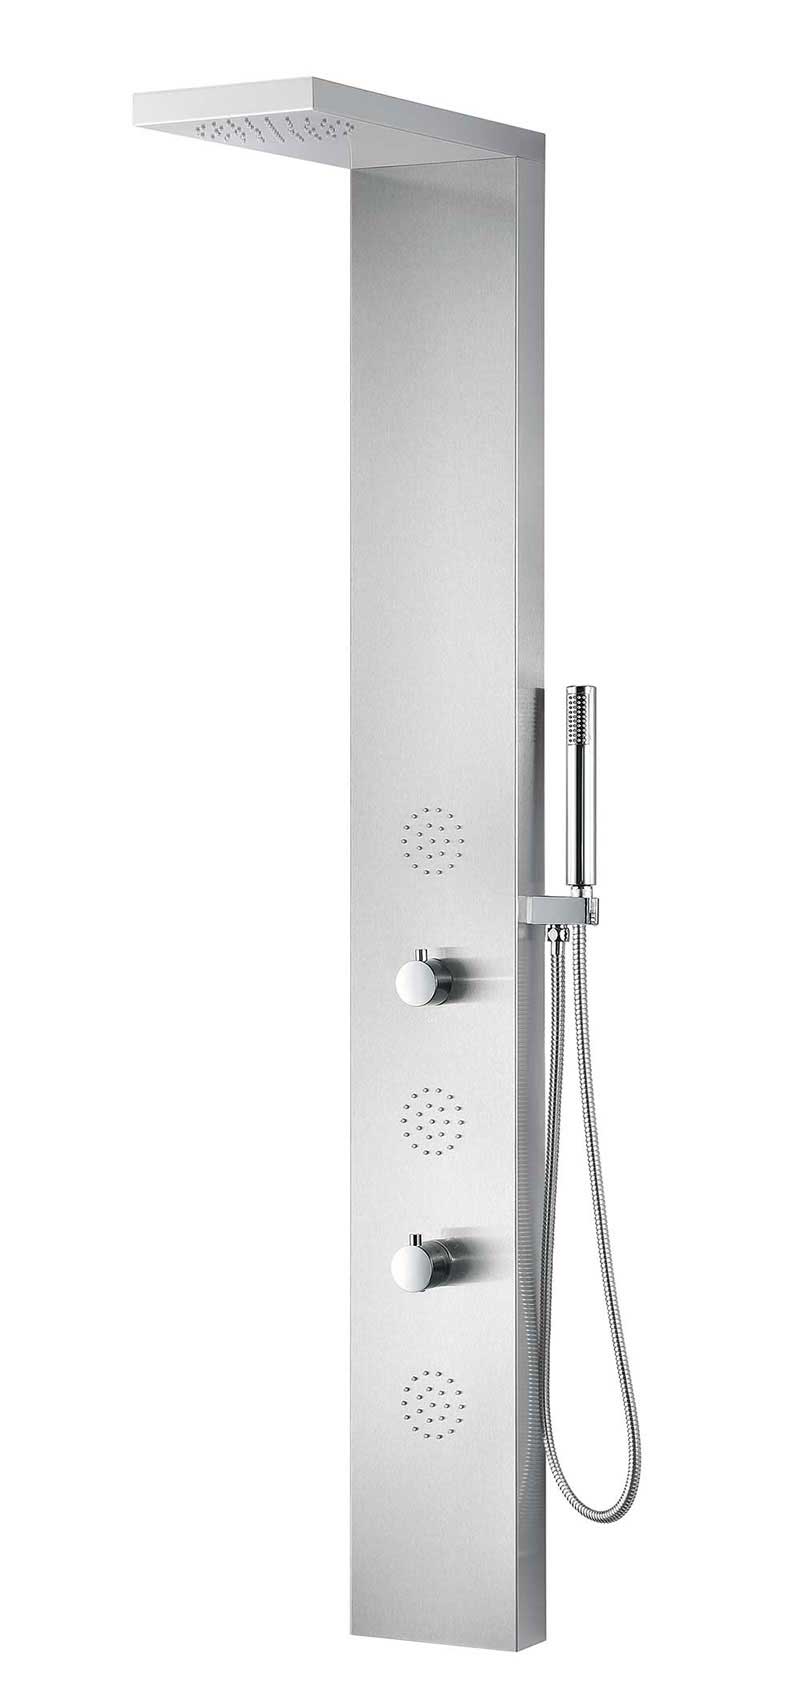 Anzzi TUNDRA Series 52 in. Full Body Shower Panel System with Heavy Rain Shower and Spray Wand in Brushed Steel